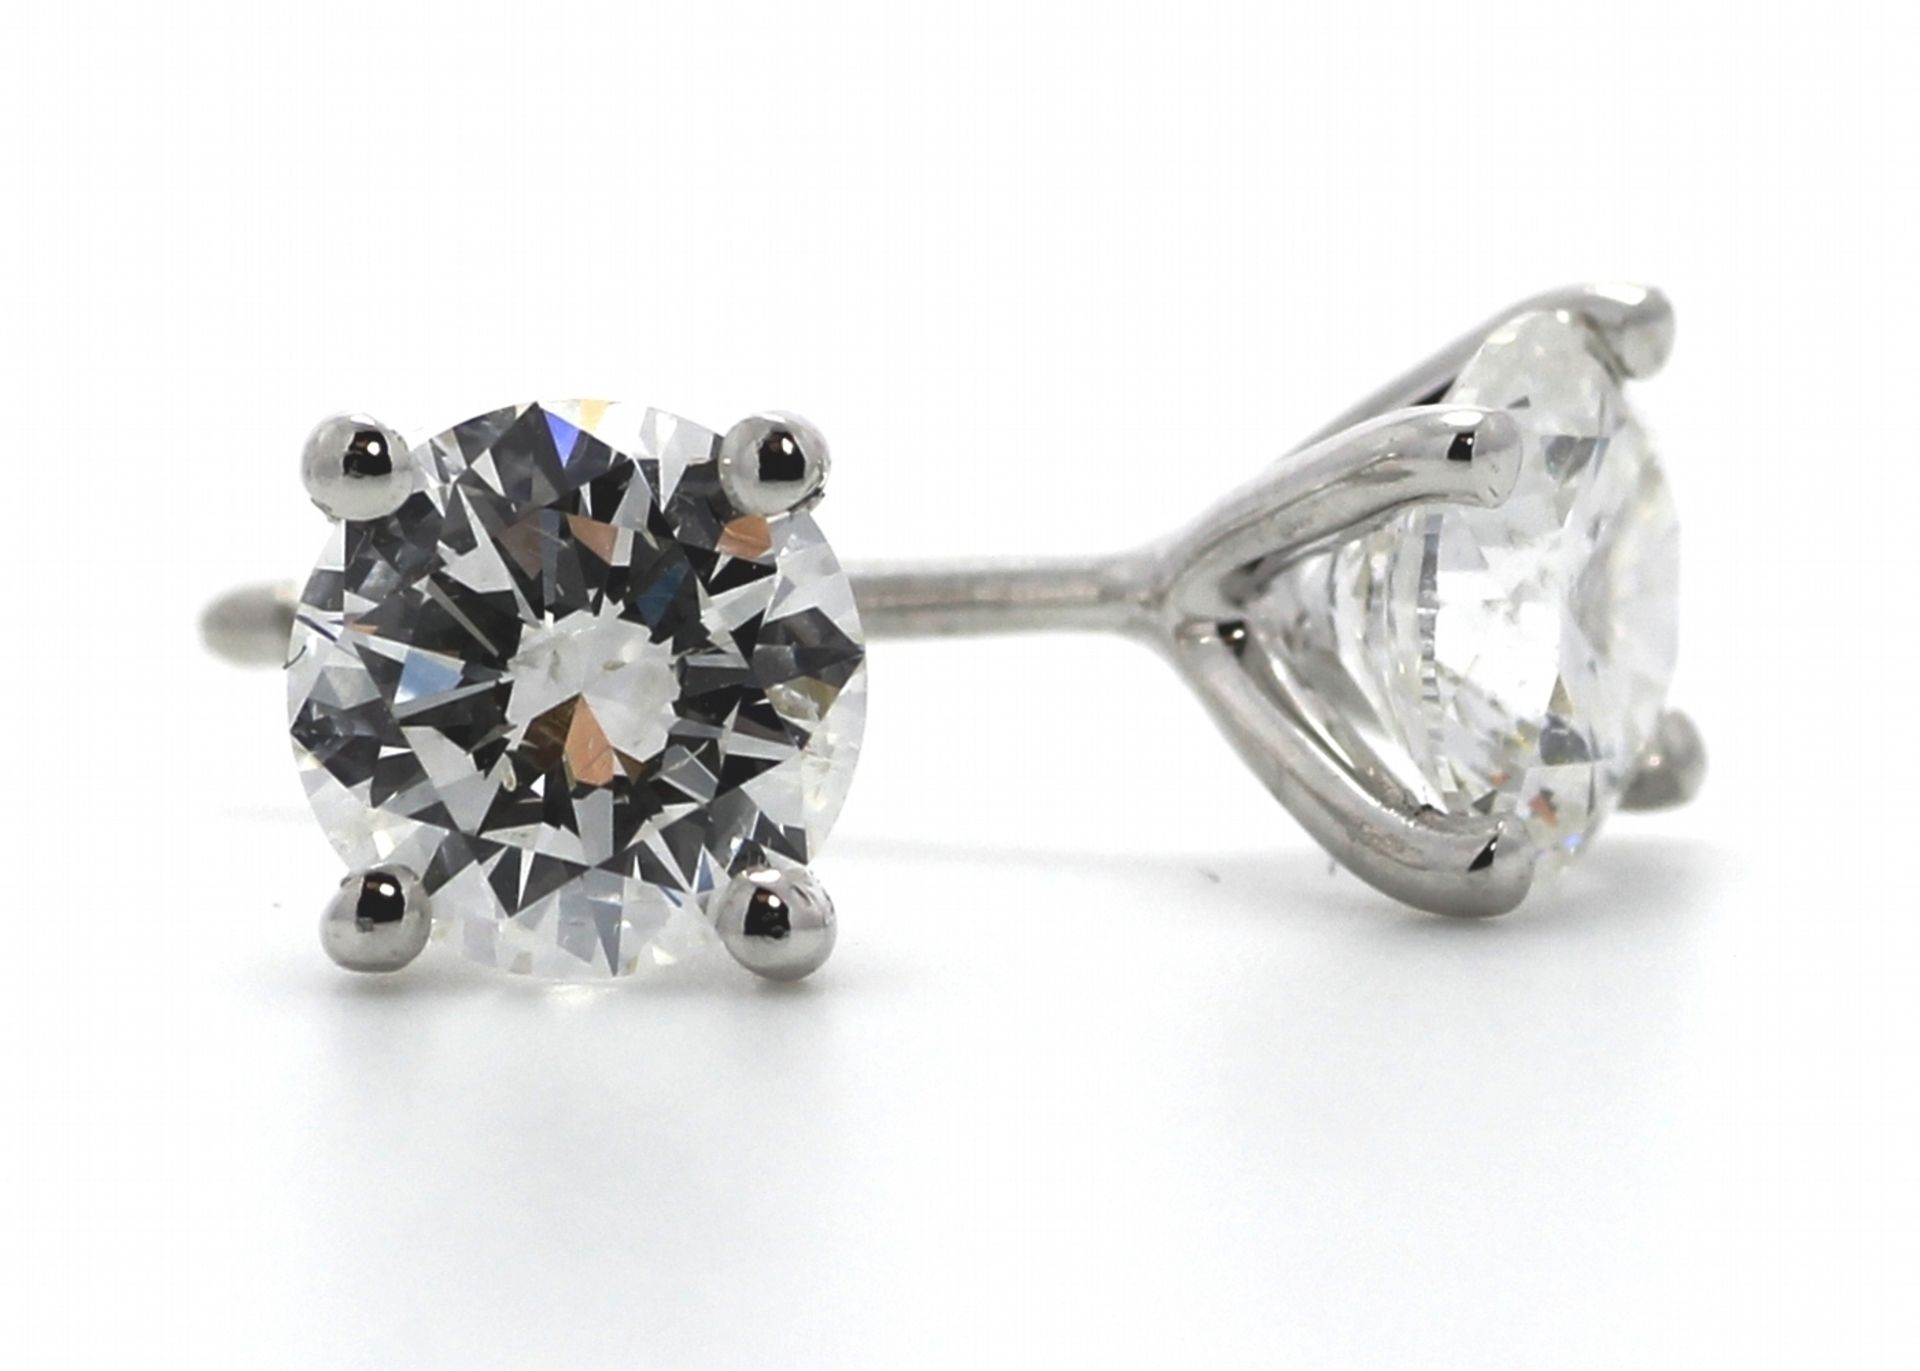 9ct White Gold Claw Set Diamond Earrins 0.50 Carats - Image 3 of 3